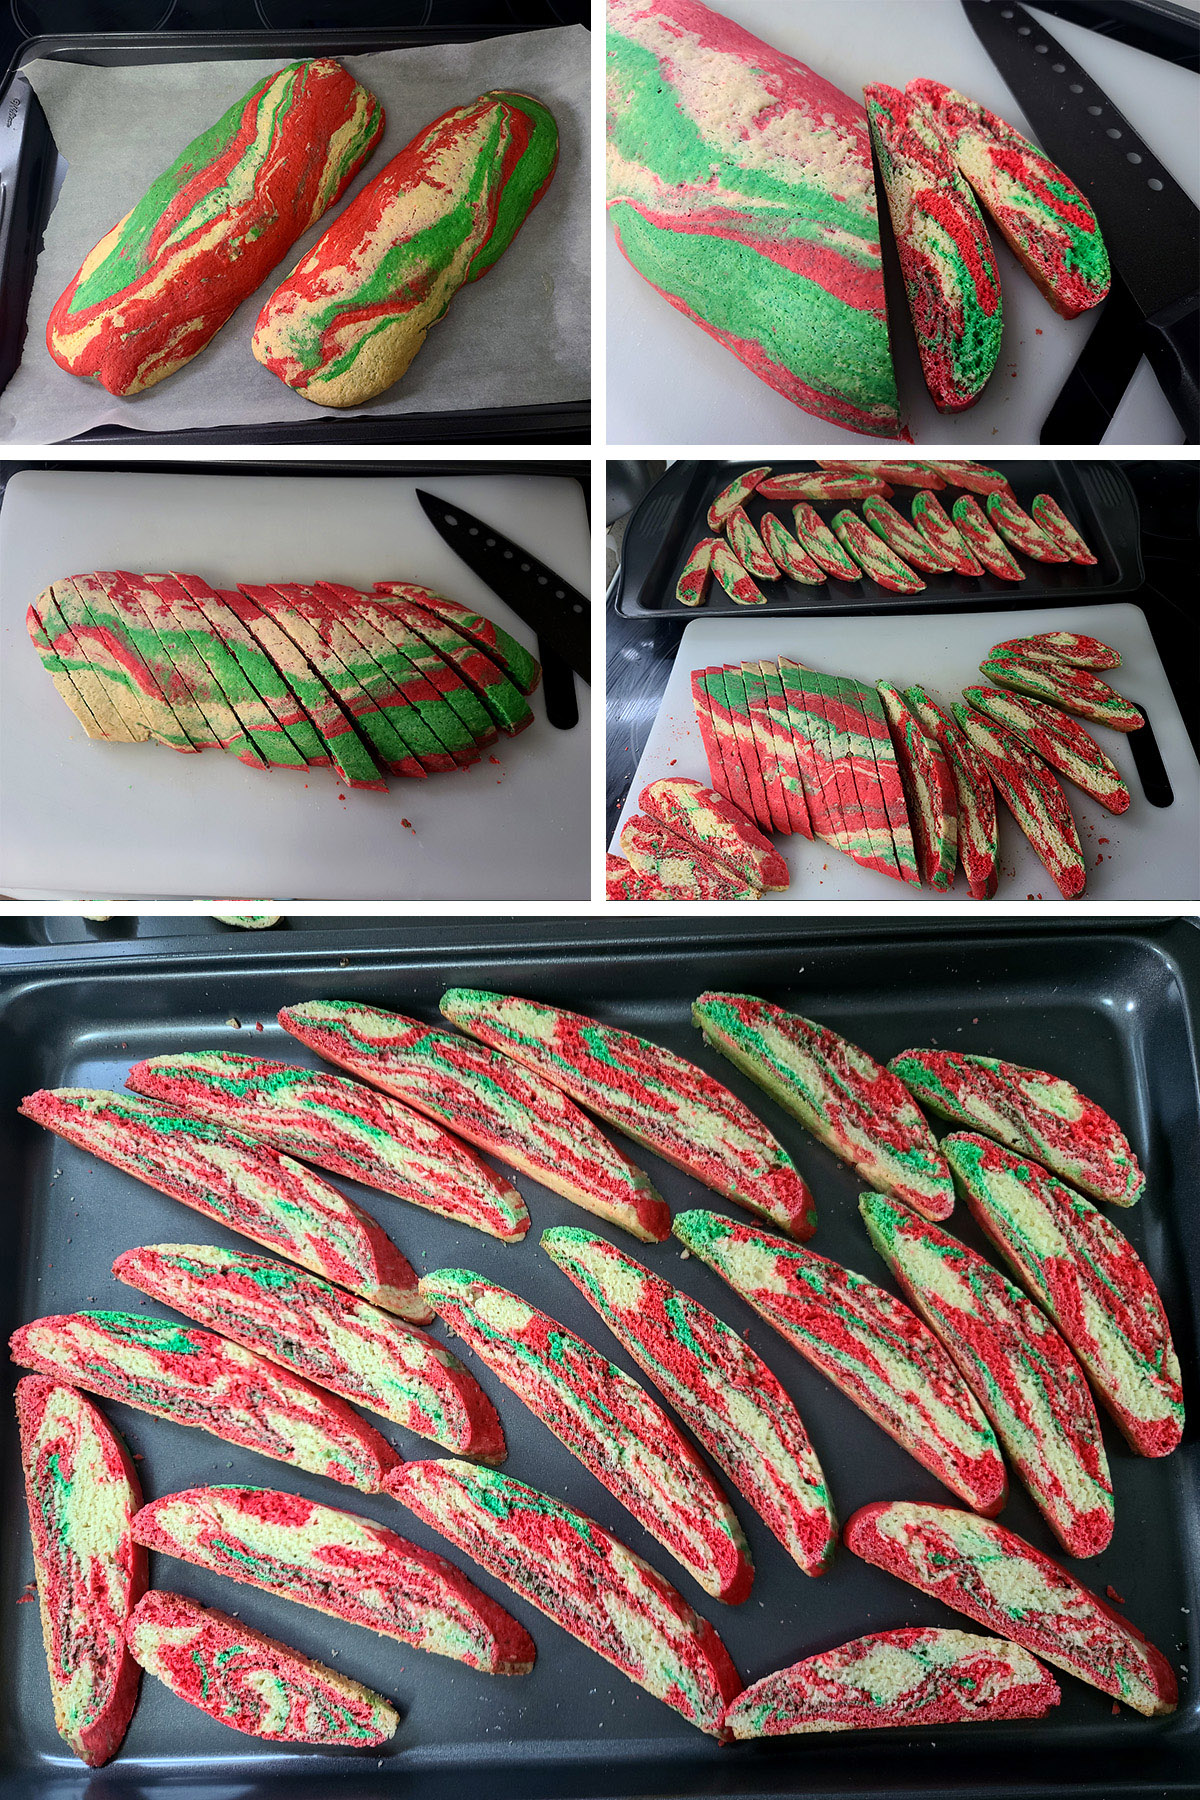 A 5 part image showing the baked loaves of marbled peppermint biscottu being sliced and arranged on baking sheets.